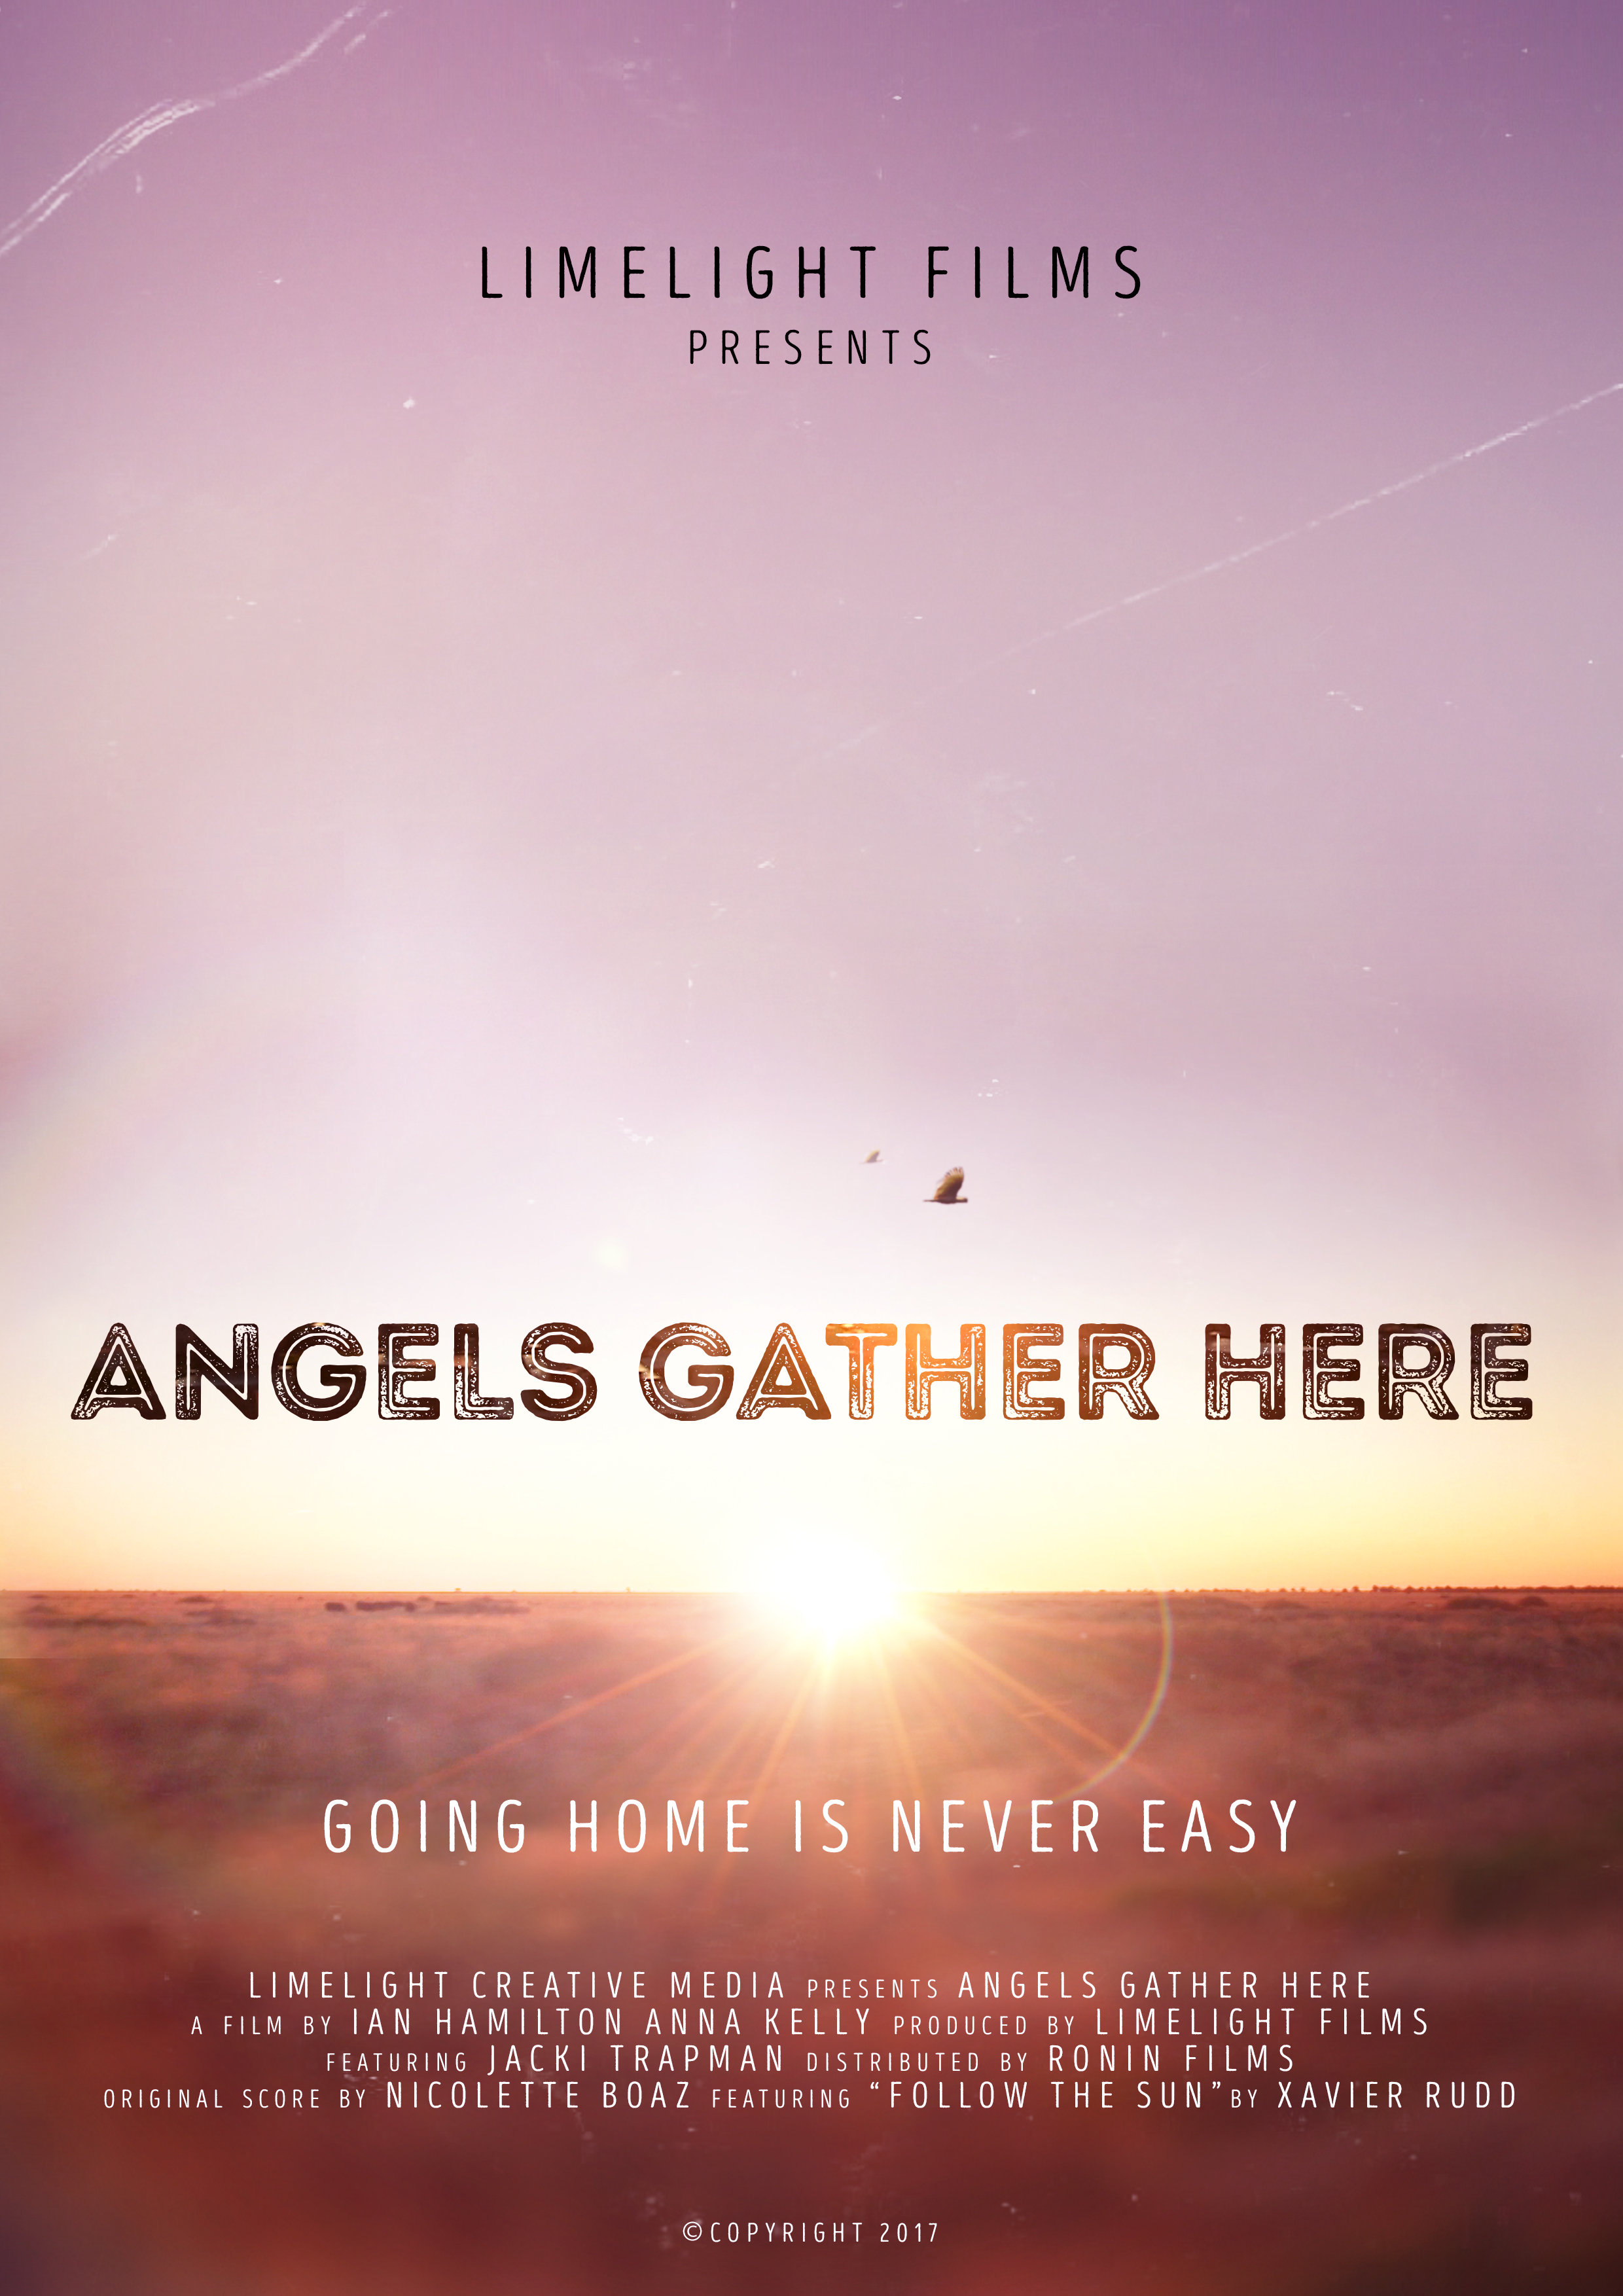 Films about Angels. Gather here